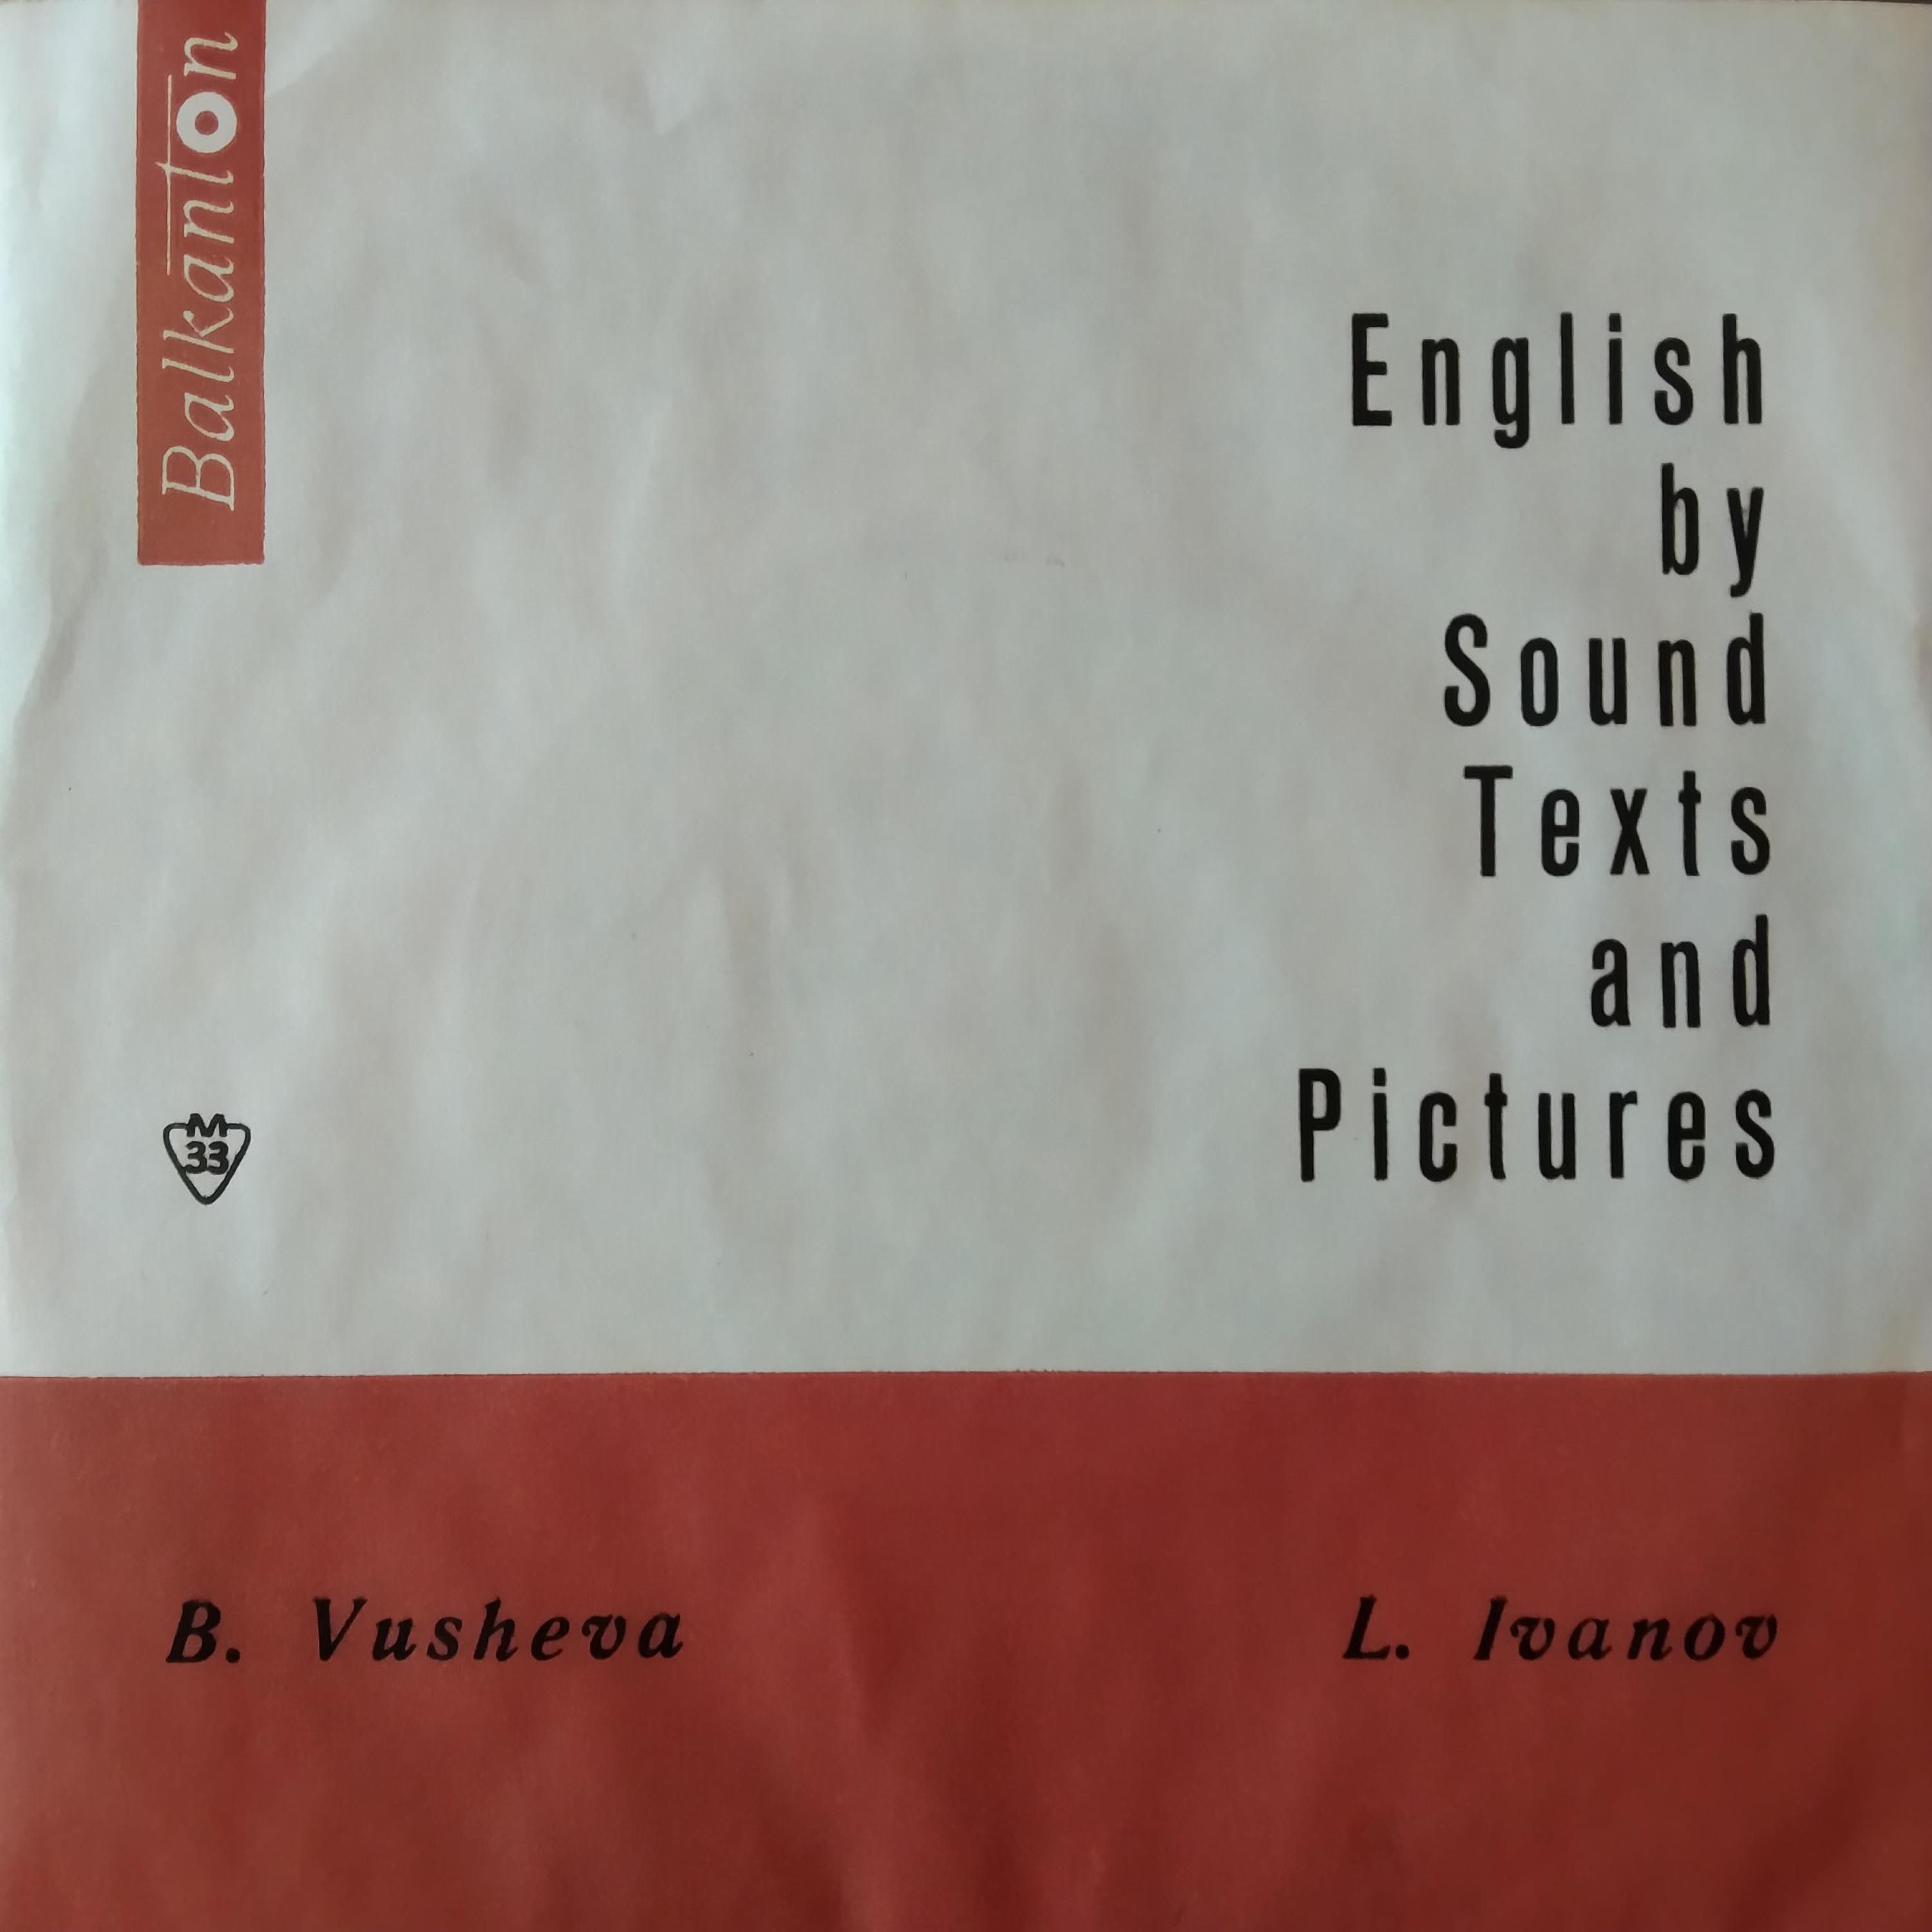 Christine Bartlett - English by sound, texts and pictures: Introductory lesson three (continued)